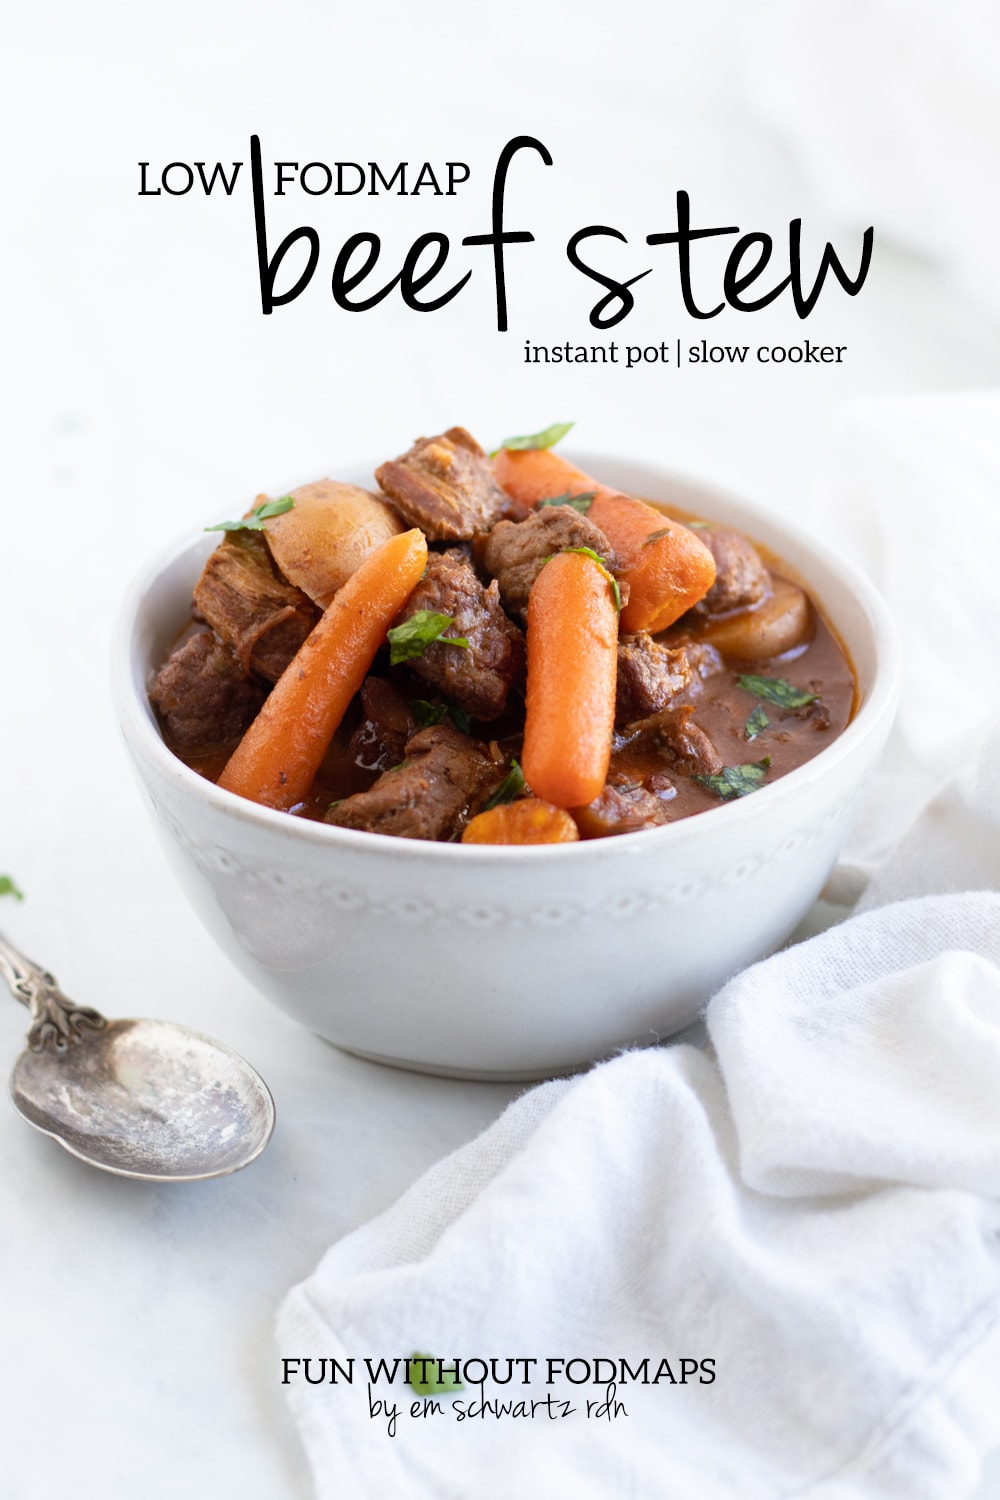 A bowl of beef stew sitting on a white marble counter. In the white space above, black text reads "Low FODMAP Beef Stew - Instant Pot | Slow Cooker."